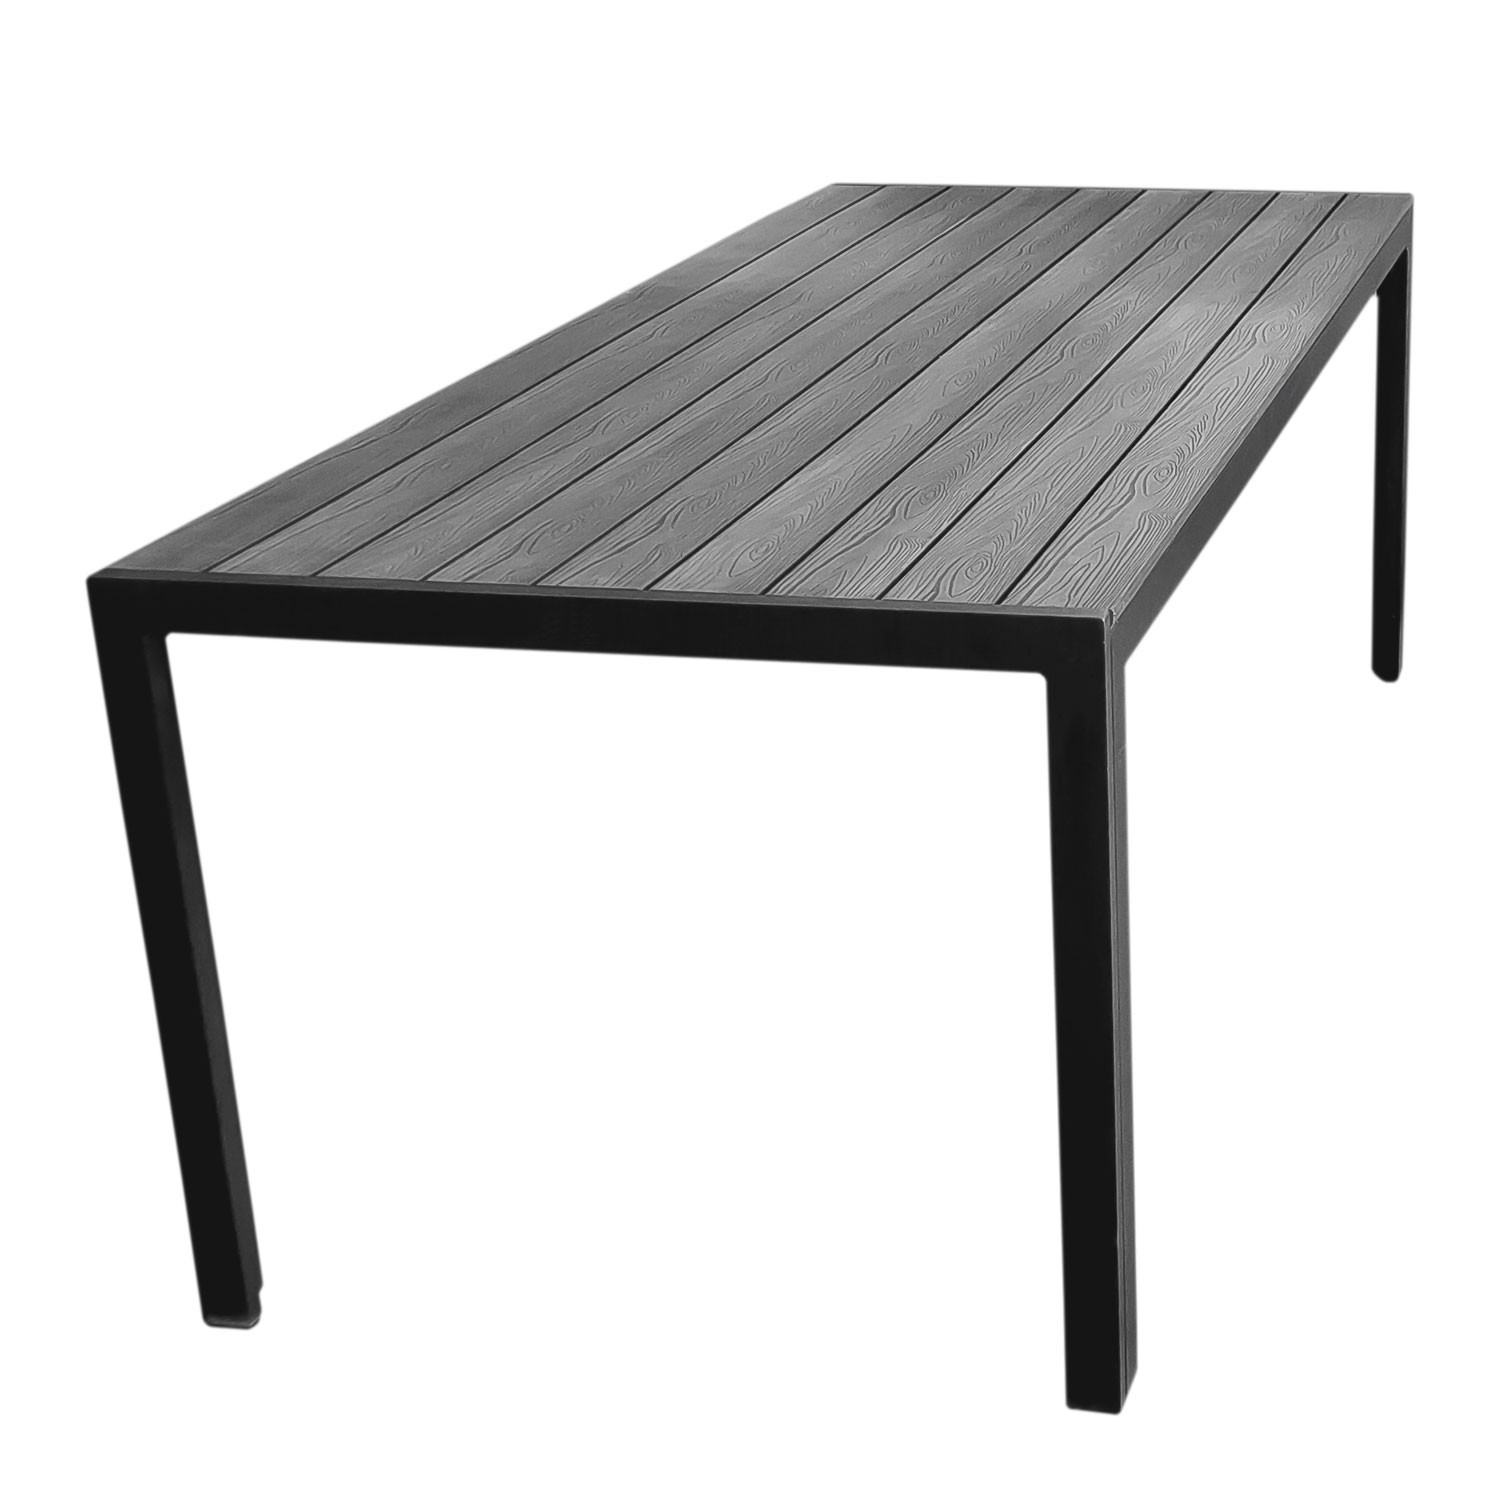 Garden Table Aluminium With Polywood Table Top With Holzprgung 150 X 90 Cm Balcony Patio Furniture Dining Table Black Grey Ceres Webshop inside proportions 1500 X 1500